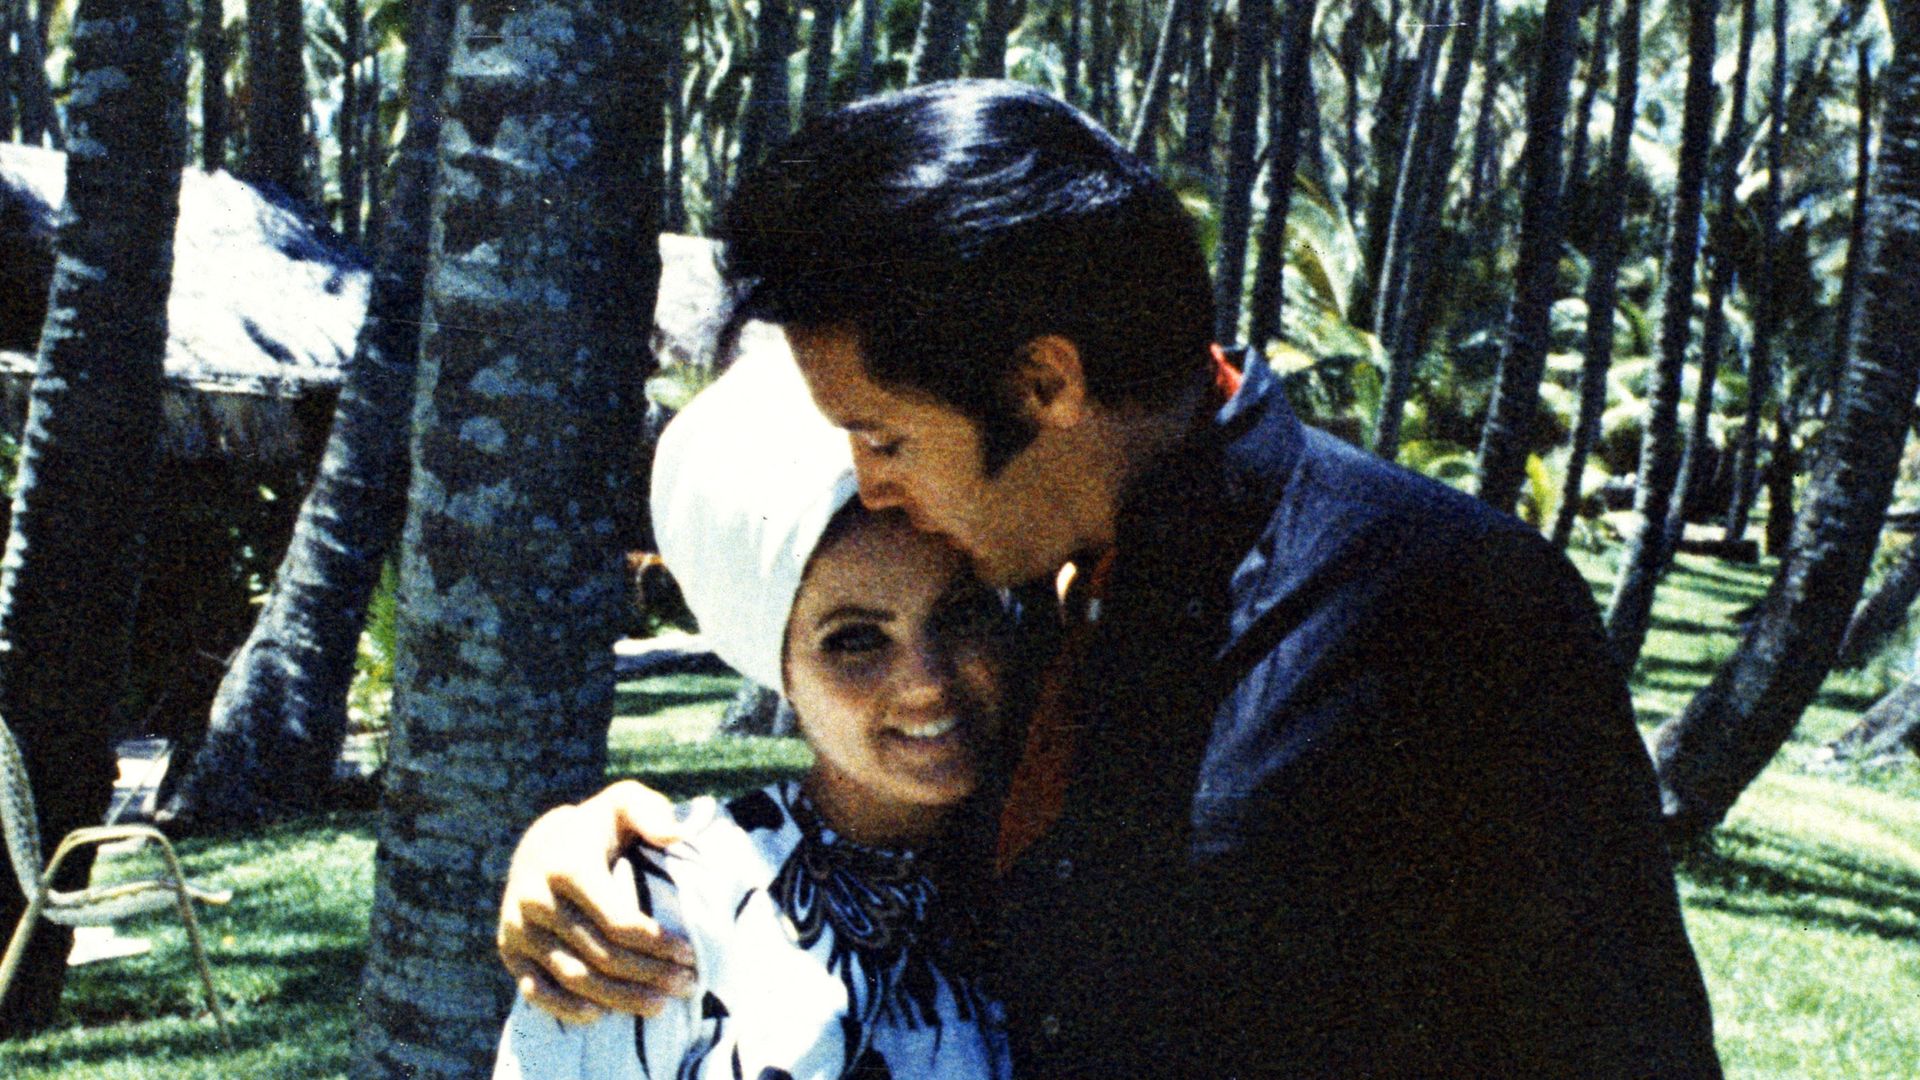 Priscilla Presley makes candid revelation about what living with Elvis Presley at Graceland was really like